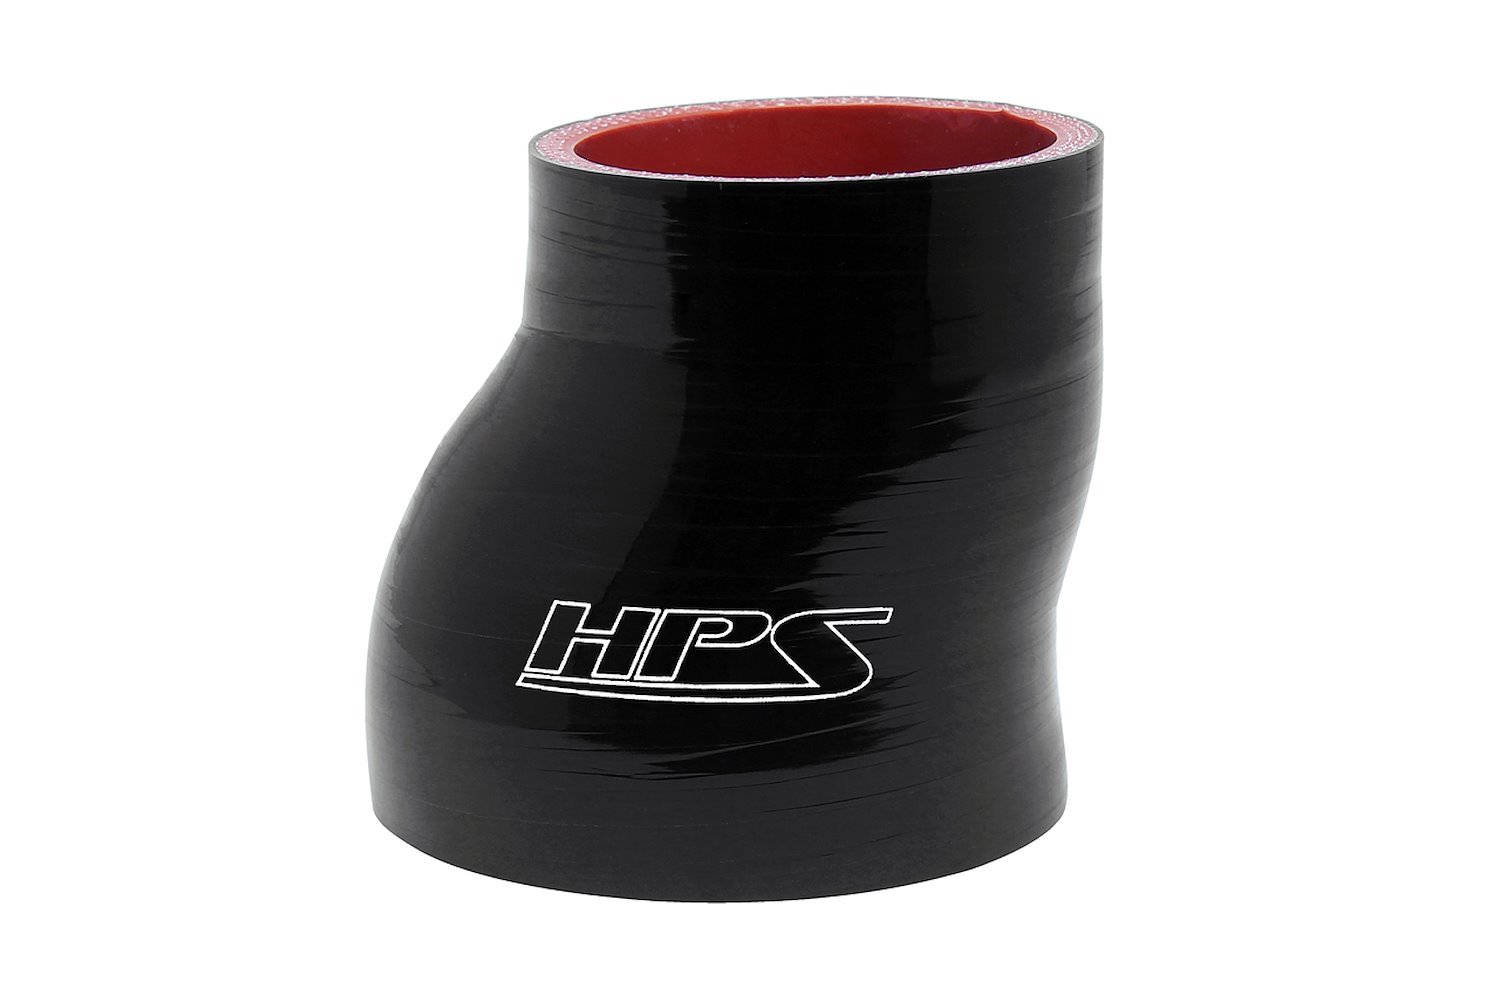 HTSOR-375-400-L4-BLK Silicone Offset Reducer Hose, High-Temp Reinforced, 3-3/4 in. - 4 in. ID, 4 in. Long, Black